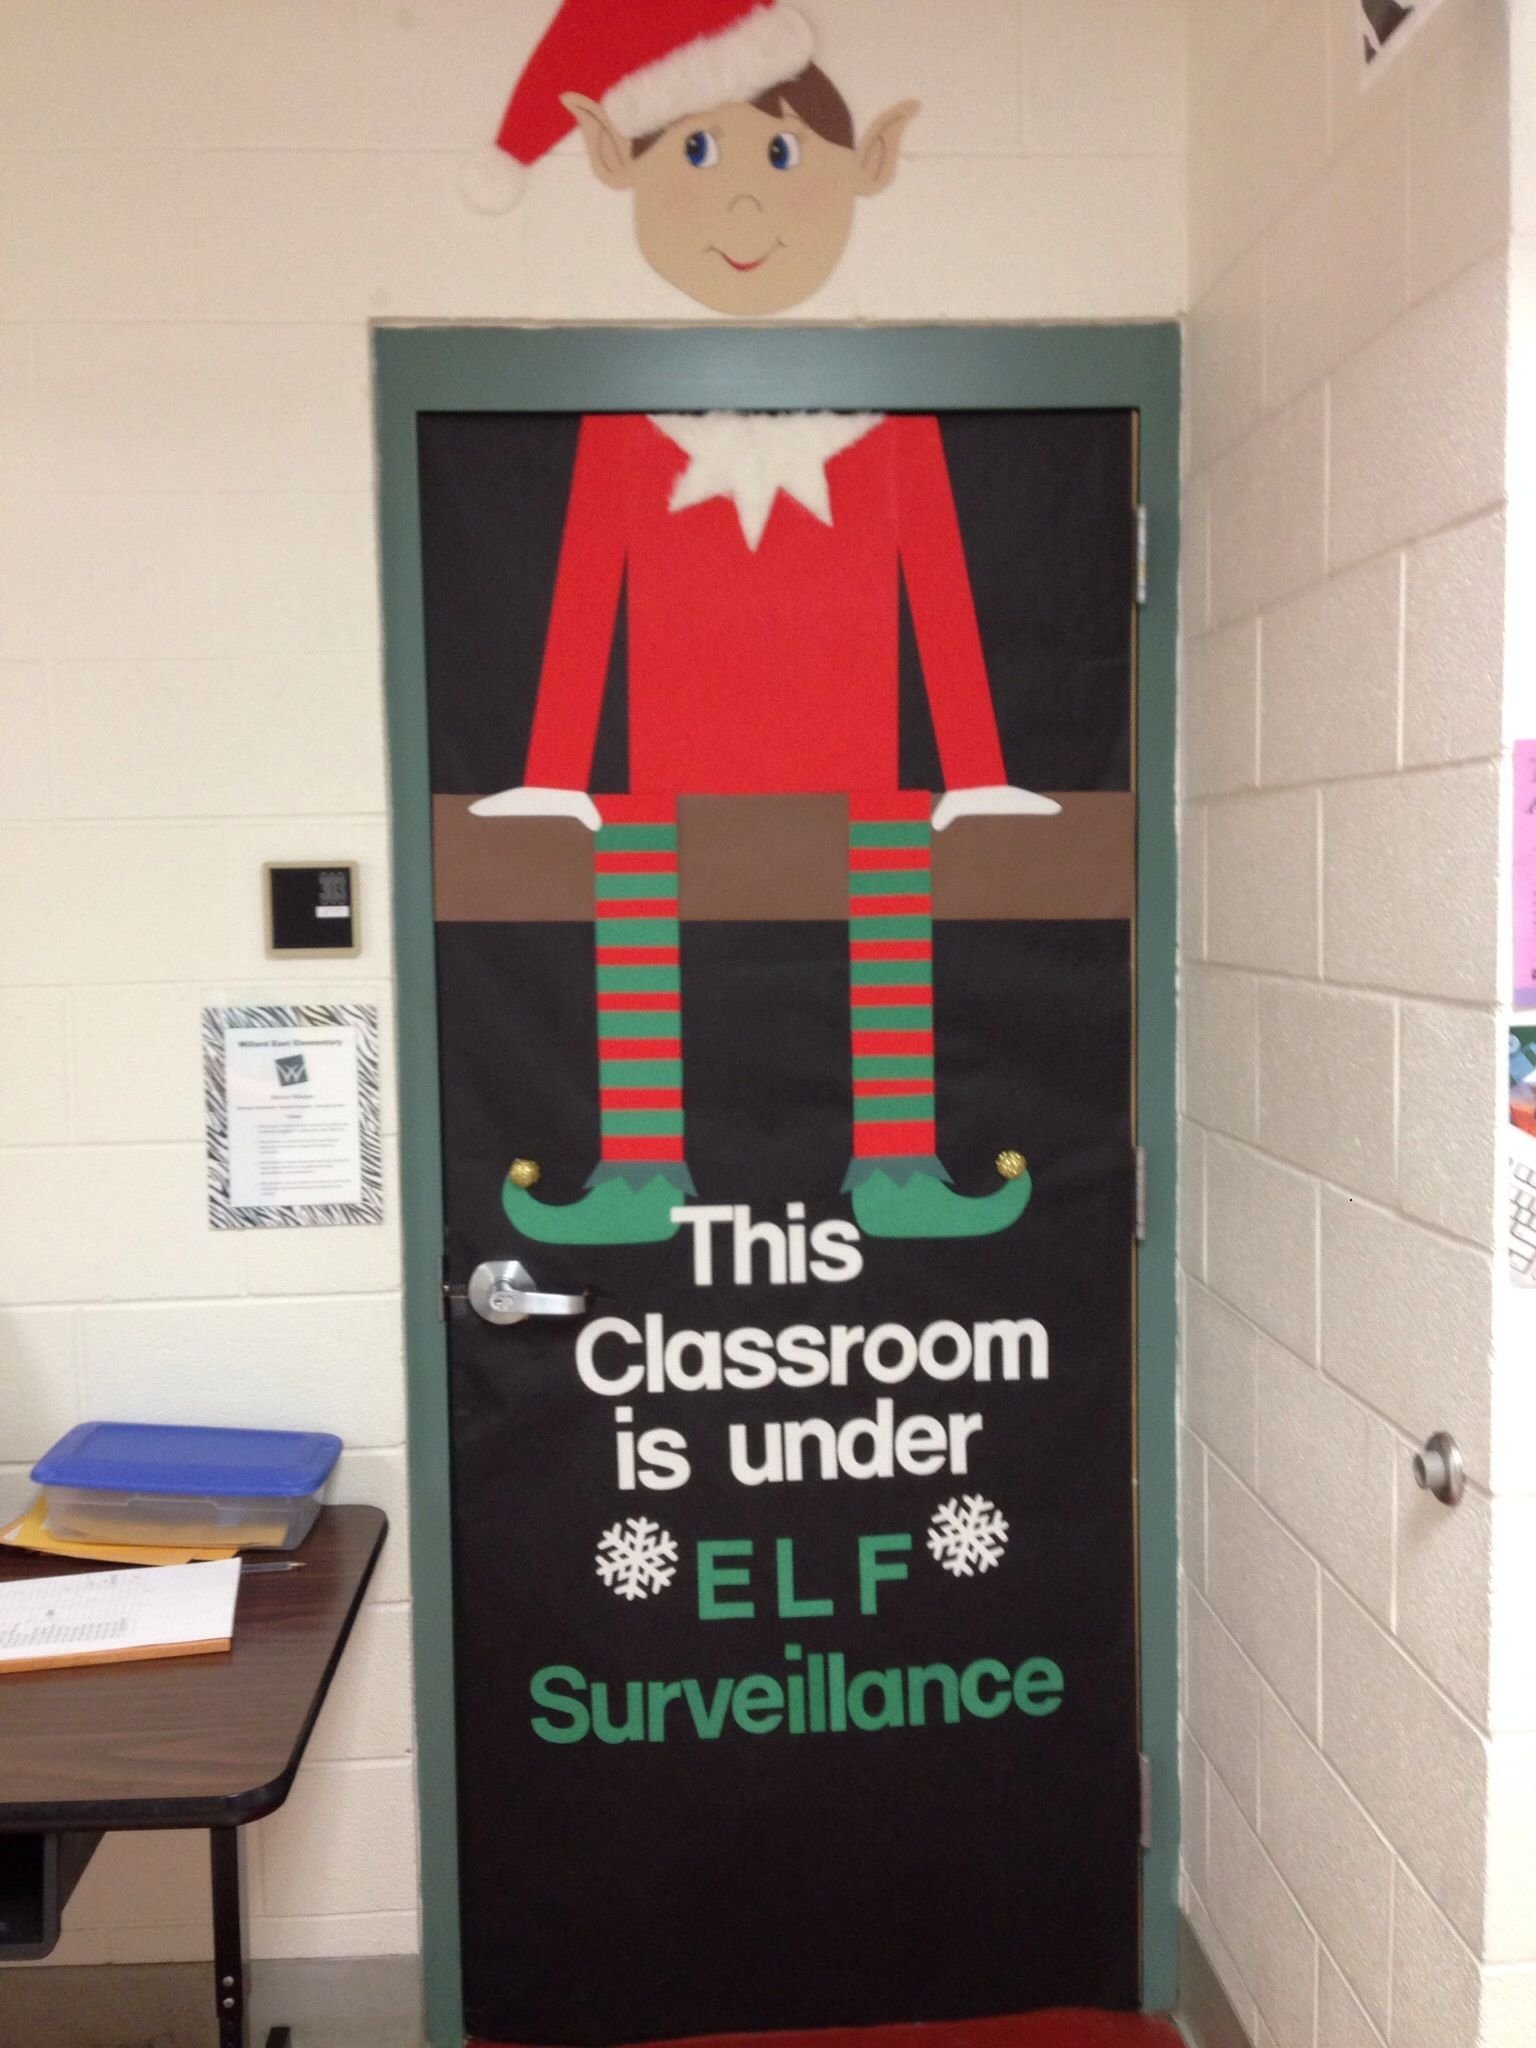 10 Gorgeous Classroom Christmas Door Decorating Contest Ideas image result for ideas for decorating bulletin board for christmas 3 2022